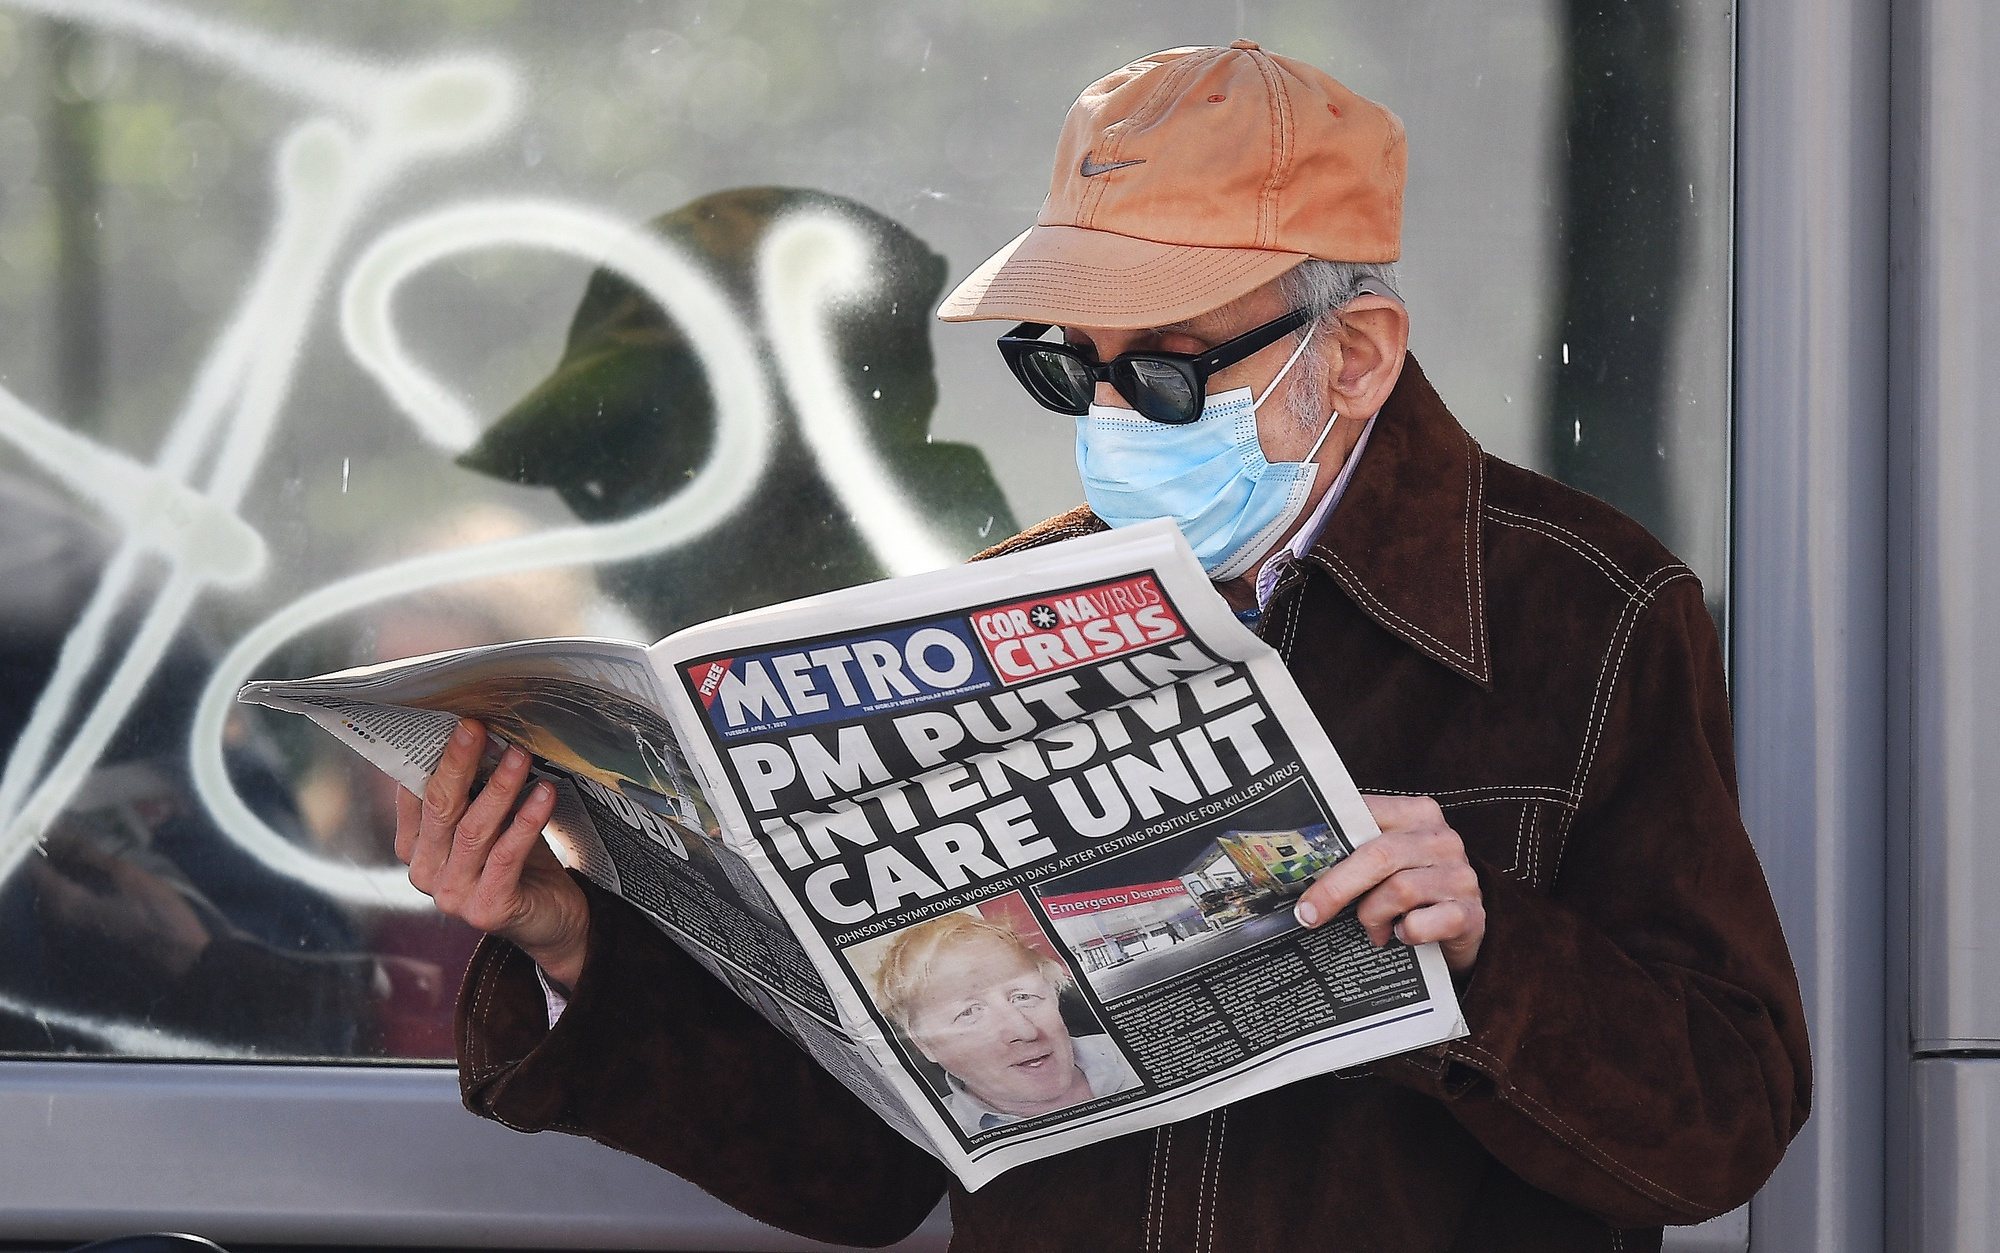 epa08347768 A man wearing a protective mask reads the news about British Prime Minister Boris Johnson&#039;s condition outside St.Thomas&#039; Hospital in London, Britain, 07 April, 2020.  According to a statement by his office, British Prime Minister Boris Johnson was admitted into St. Thomas&#039; Intensive Care Unit (ICU) on the evening of 06 April – 11 days after first having tested positive for the pandemic COVID-19 disease caused by the SARS-CoV-2 coronavirus – due to a worsening of his symptoms. First Secretary of State Dominic Raab, who also serves as Secretary of State for Foreign and Commonwealth Affairs, will be deputizing for Johnson when needed, the statement added.  EPA/ANDY RAIN